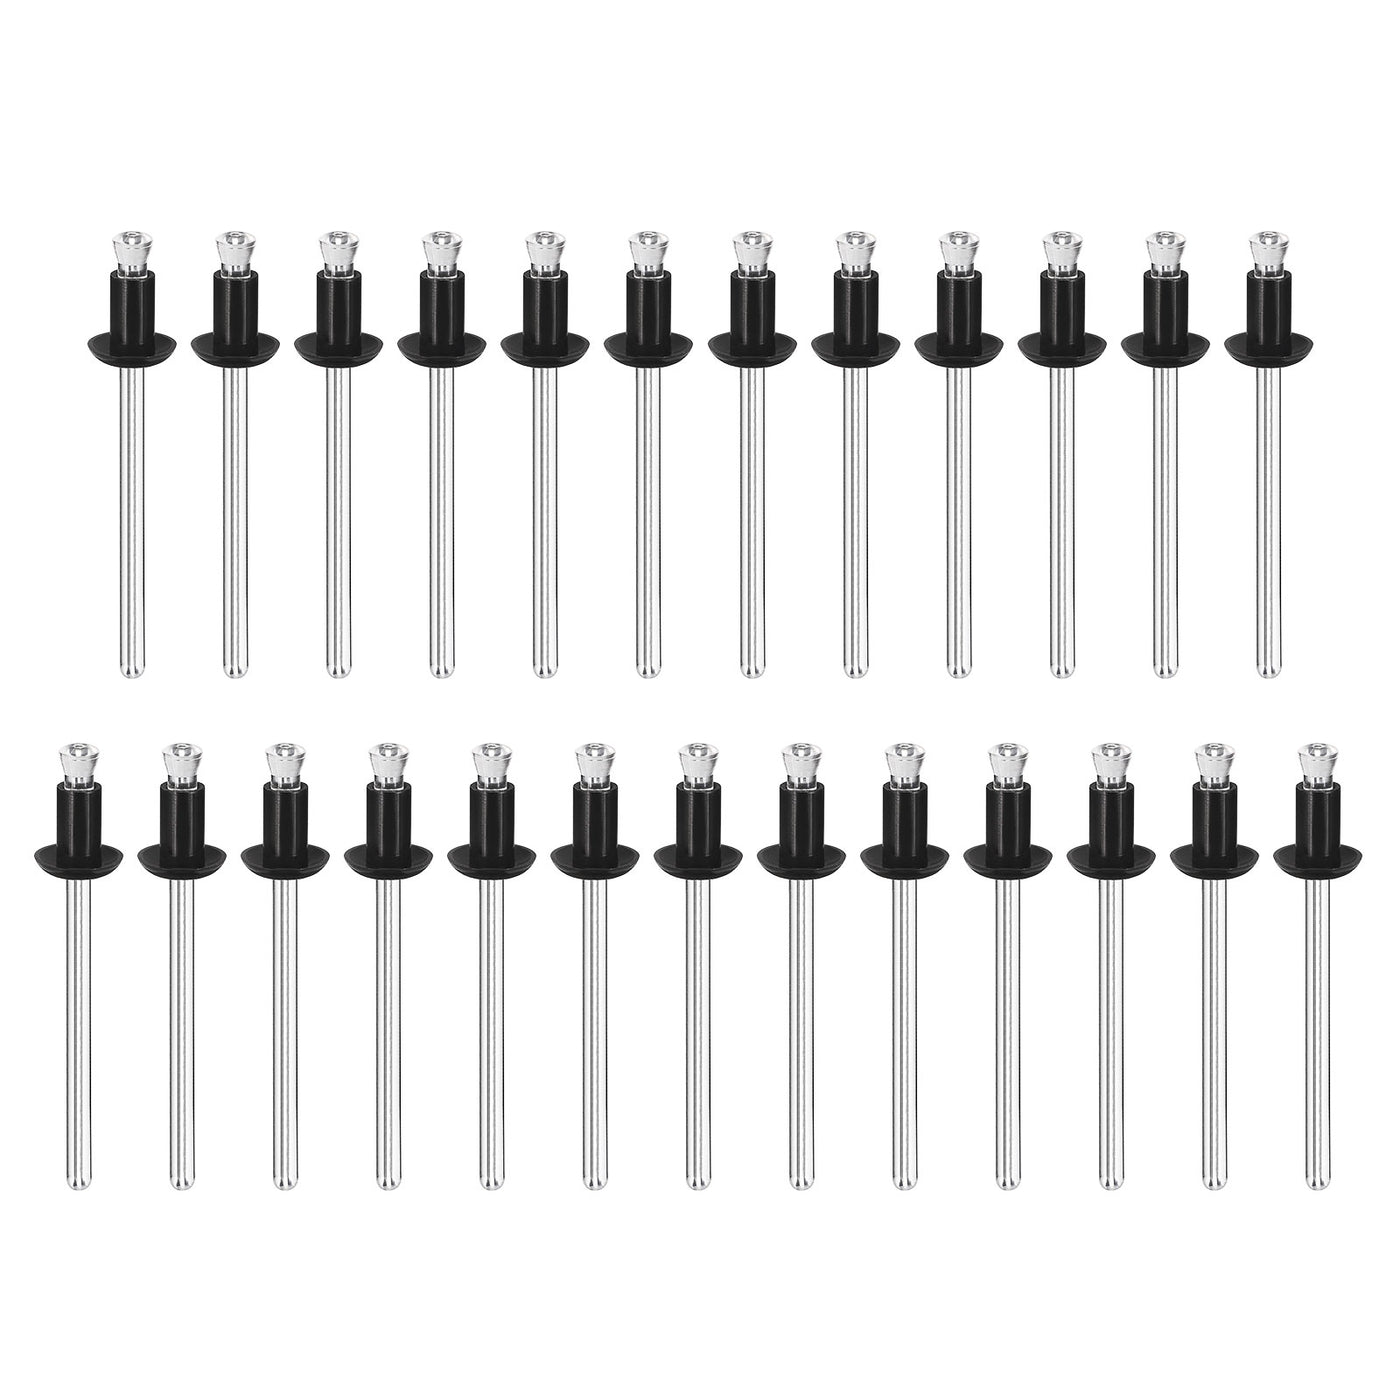 uxcell Uxcell 4.8mm x 8mm Nylon Blind Rivets for PC Board Bumper Trim Retainer, Black 50Pcs